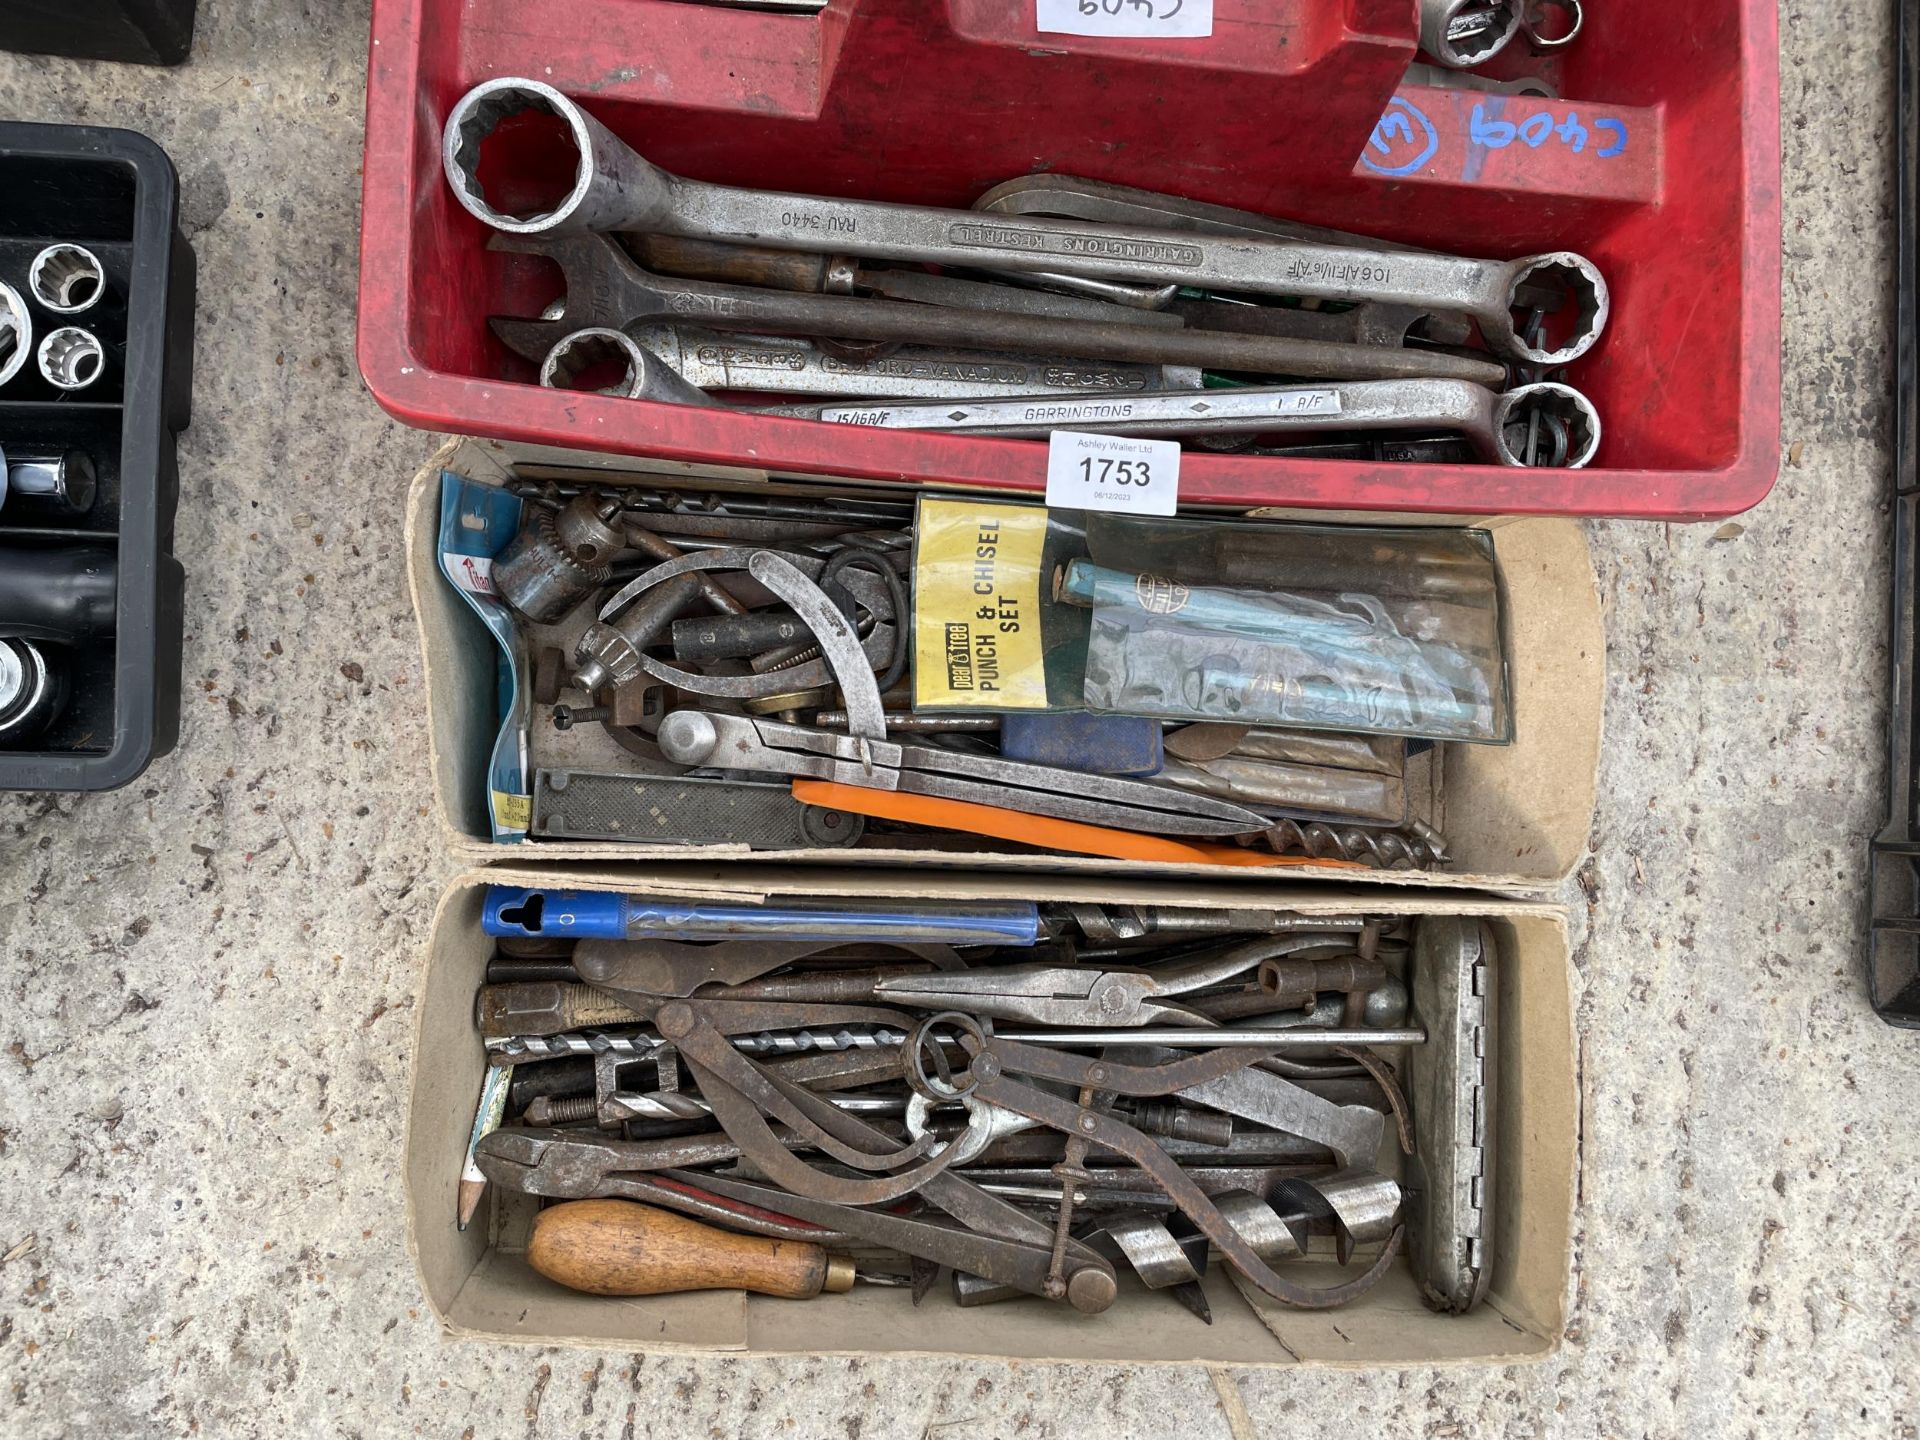 A LARGE ASSORTMENT OF HAND TOOLS TO INCLUDE CHISELS, SPANNERS AND PLIERS ETC - Image 3 of 3